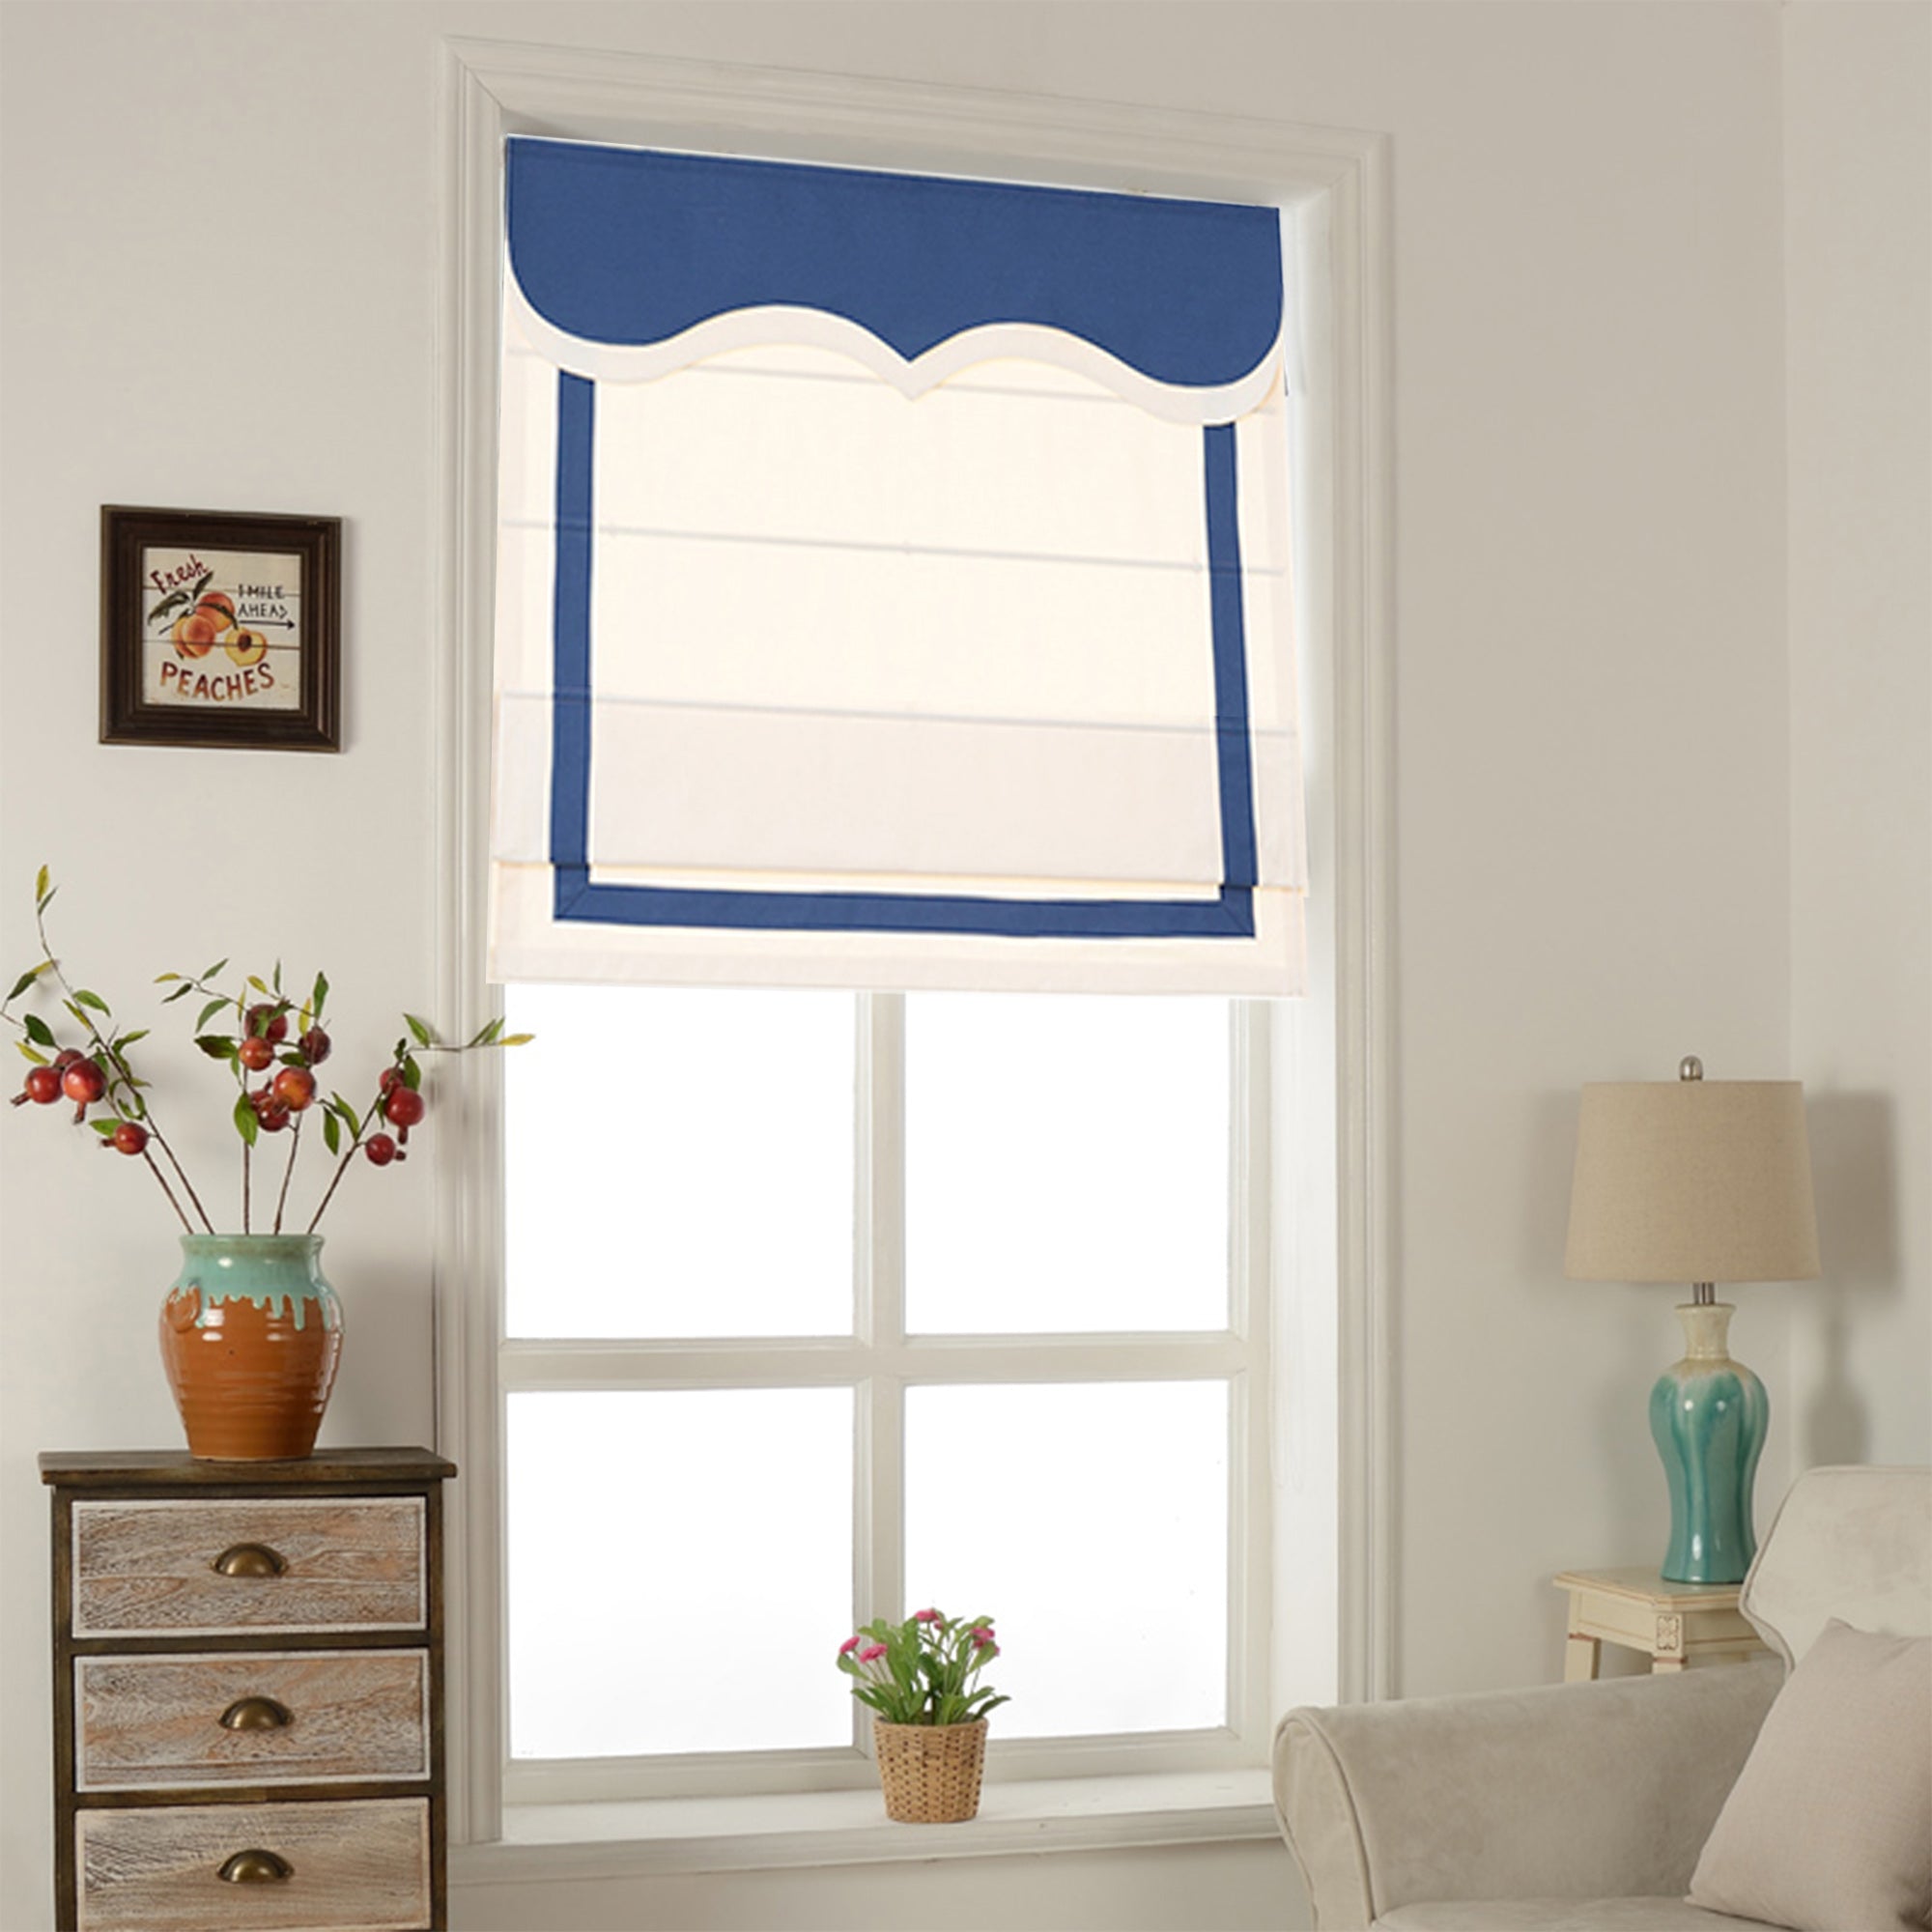 Quick Fix Washable Roman Window Shades Flat Fold with Valance, SG-009 White with Blue Trim